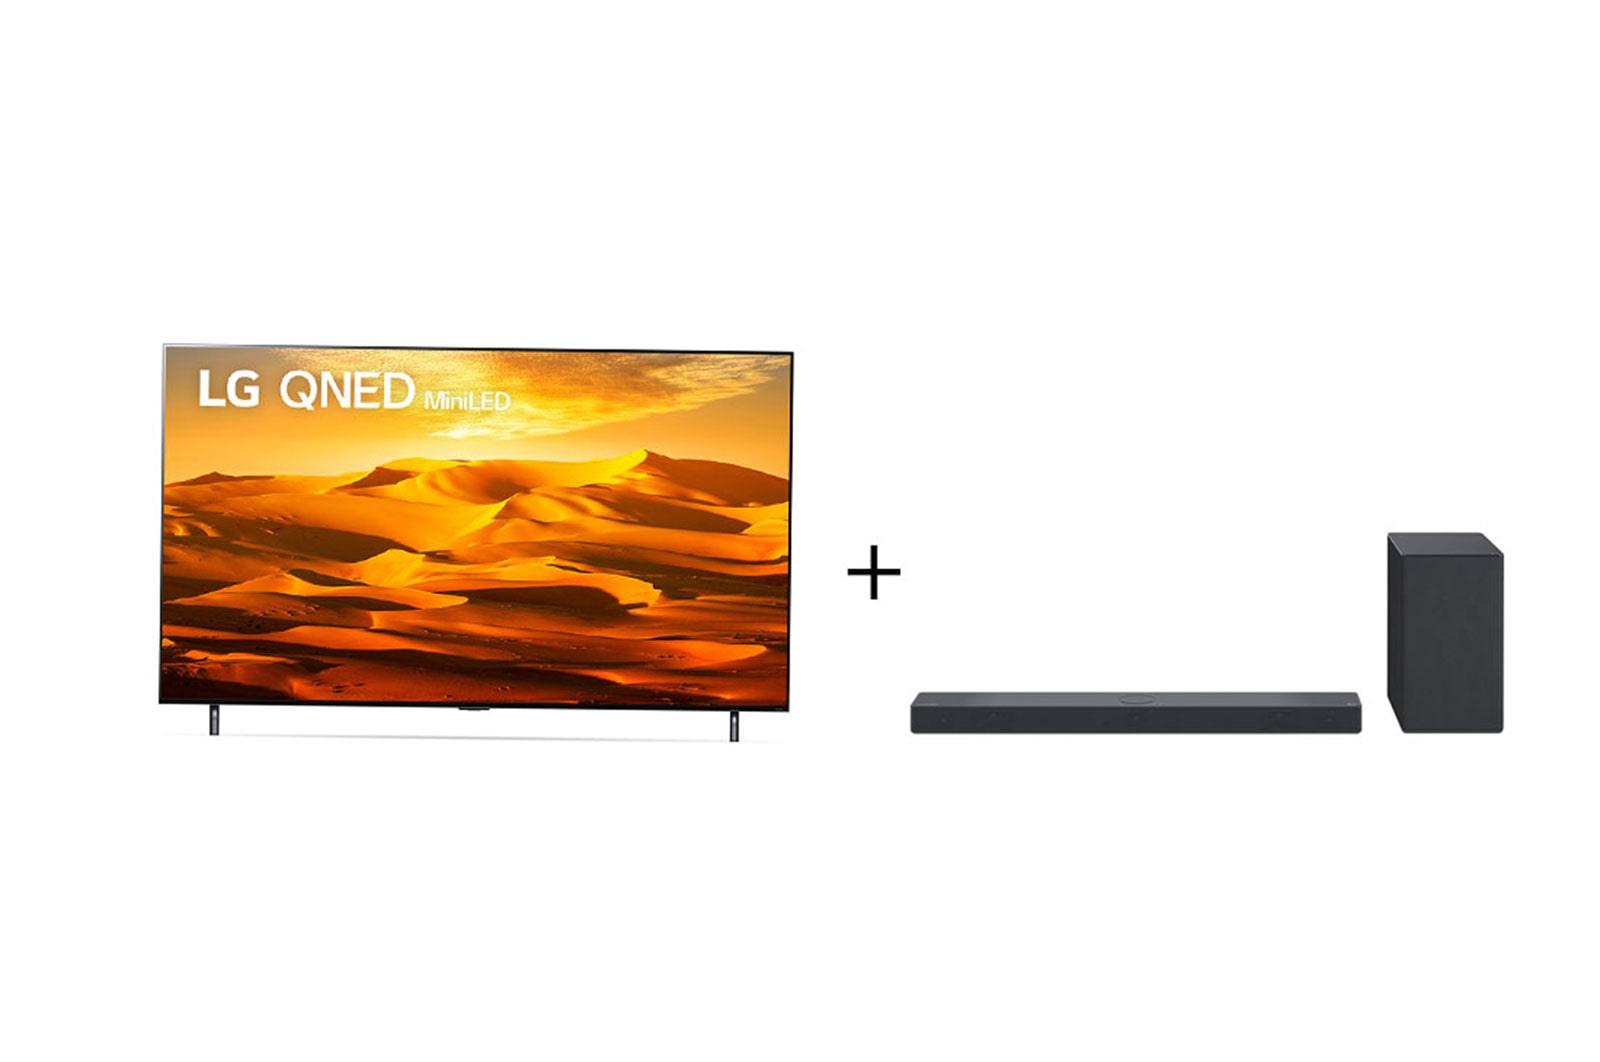 LG Combo Smart TV 75QNED90S + Sound Bar SC9S, 75QNED90S.SC9S